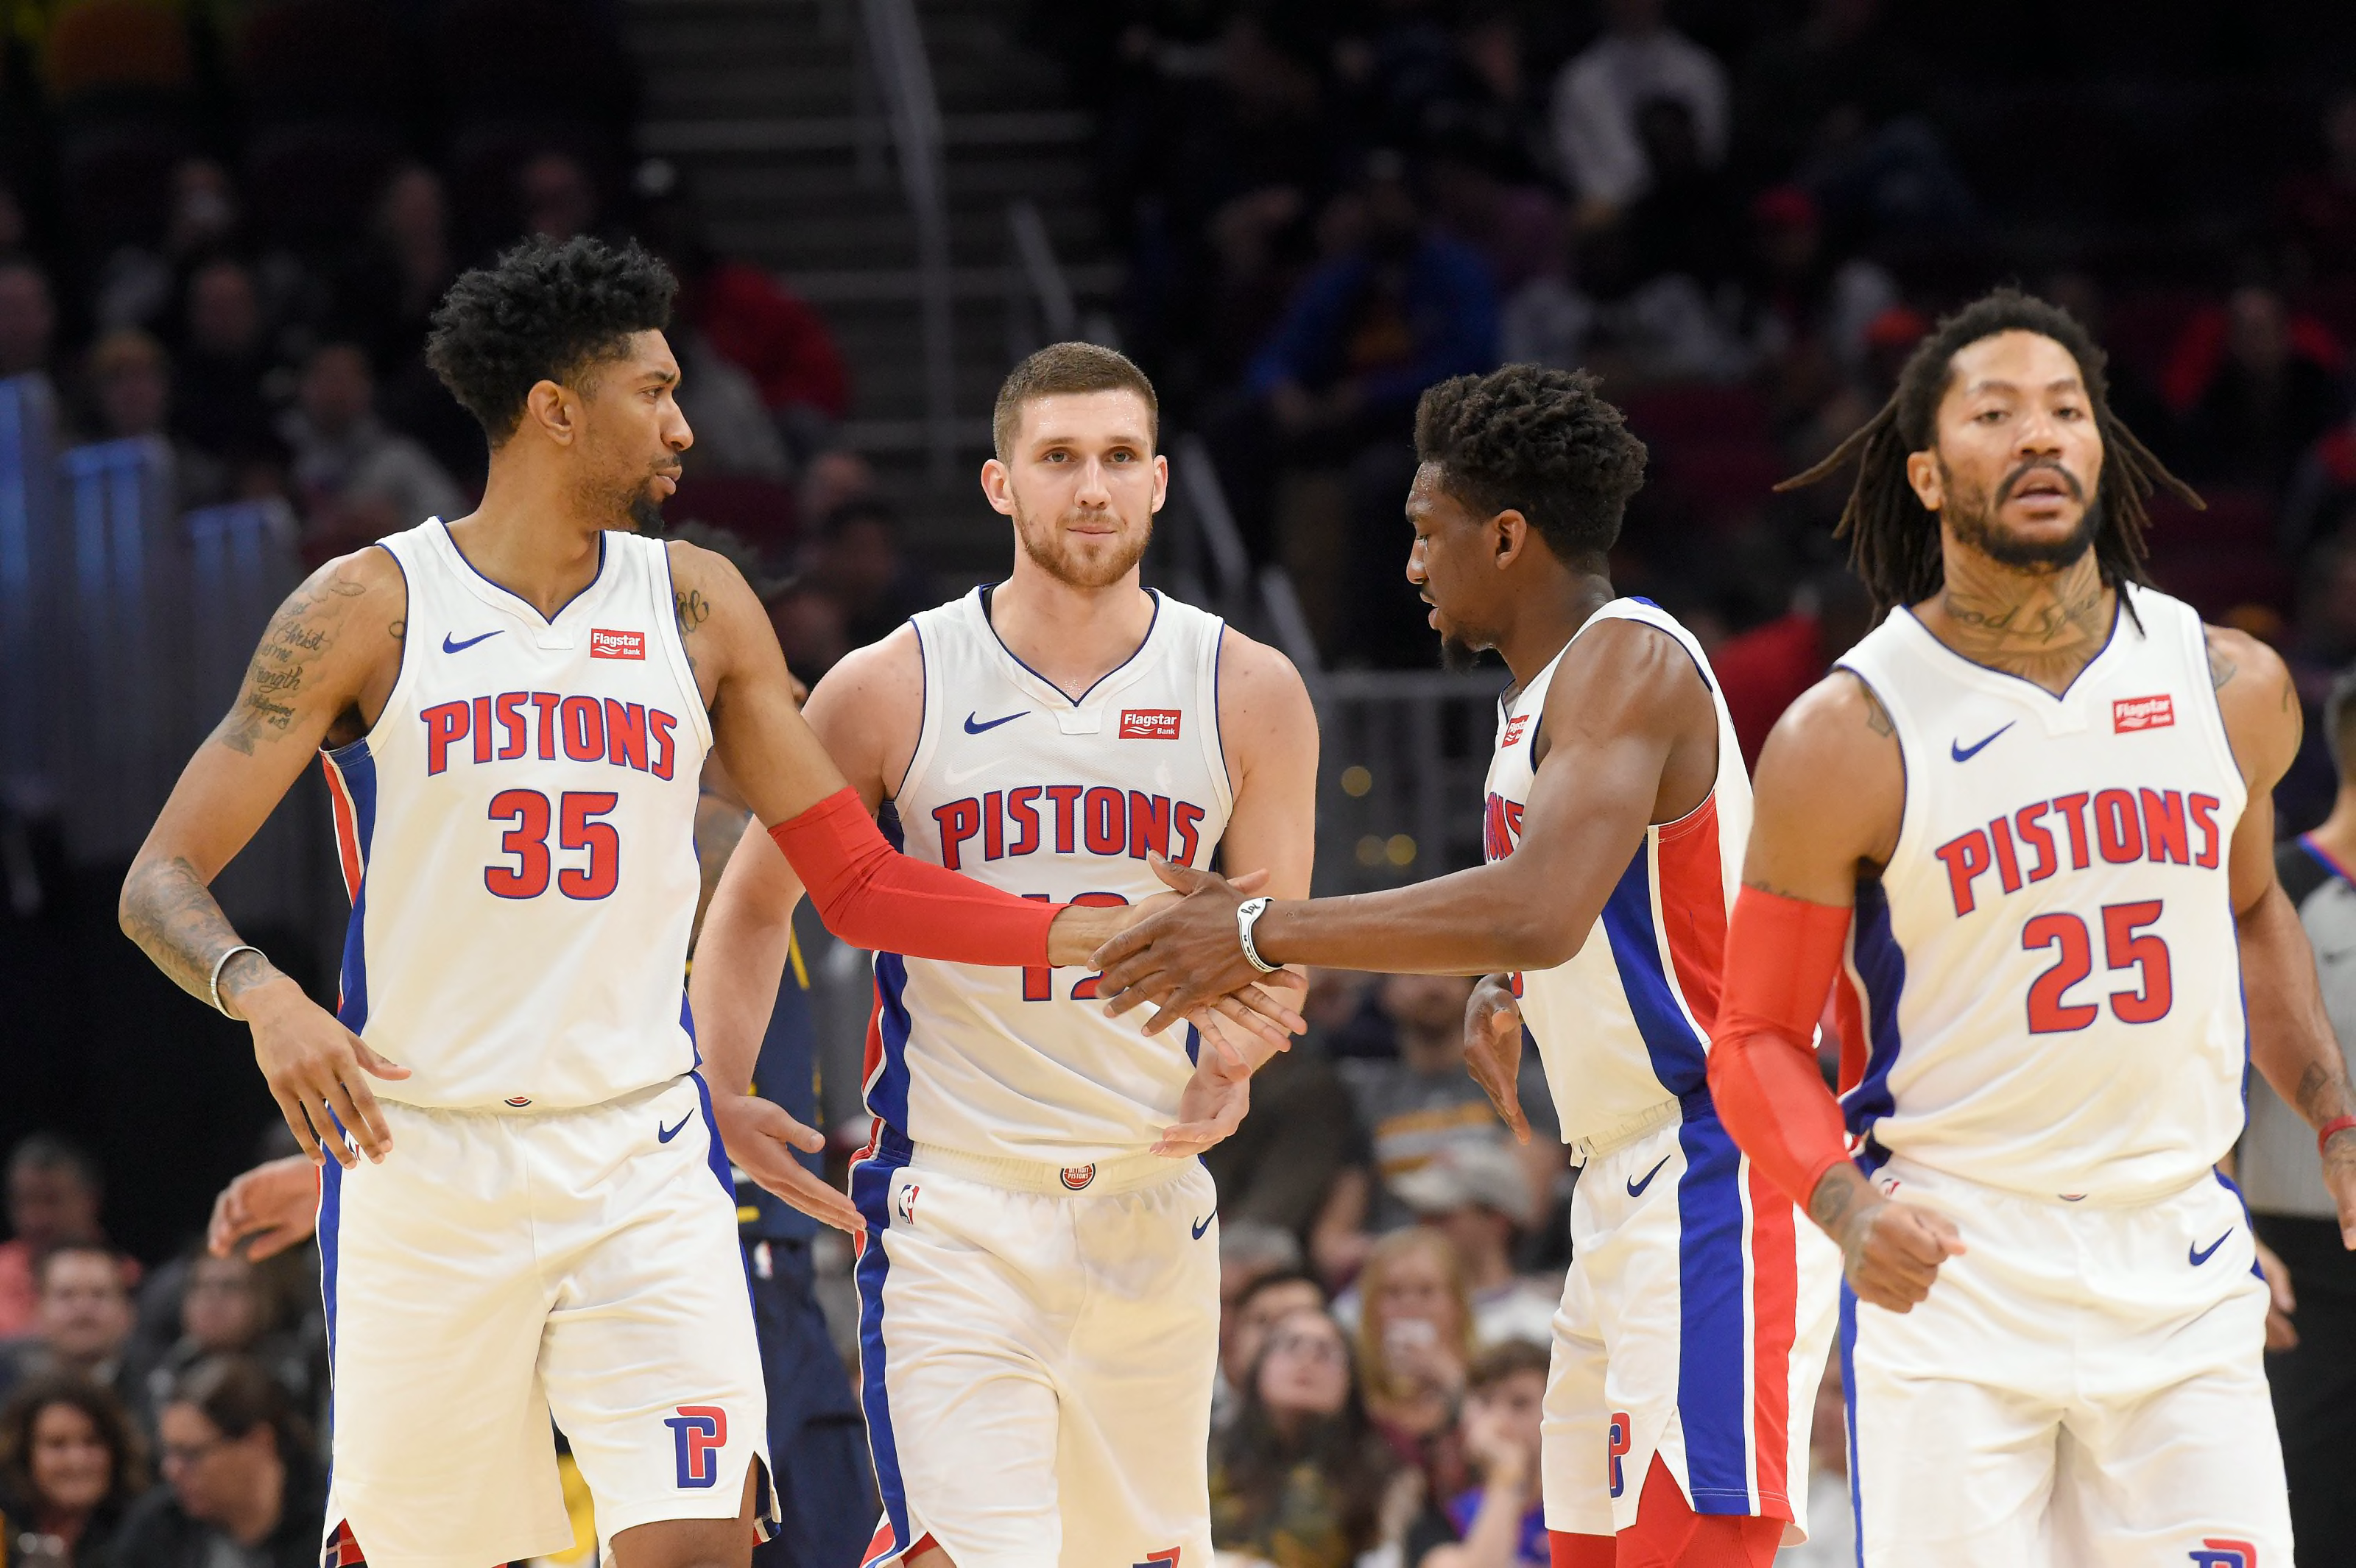 Detroit Pistons: Four players who were positives this season